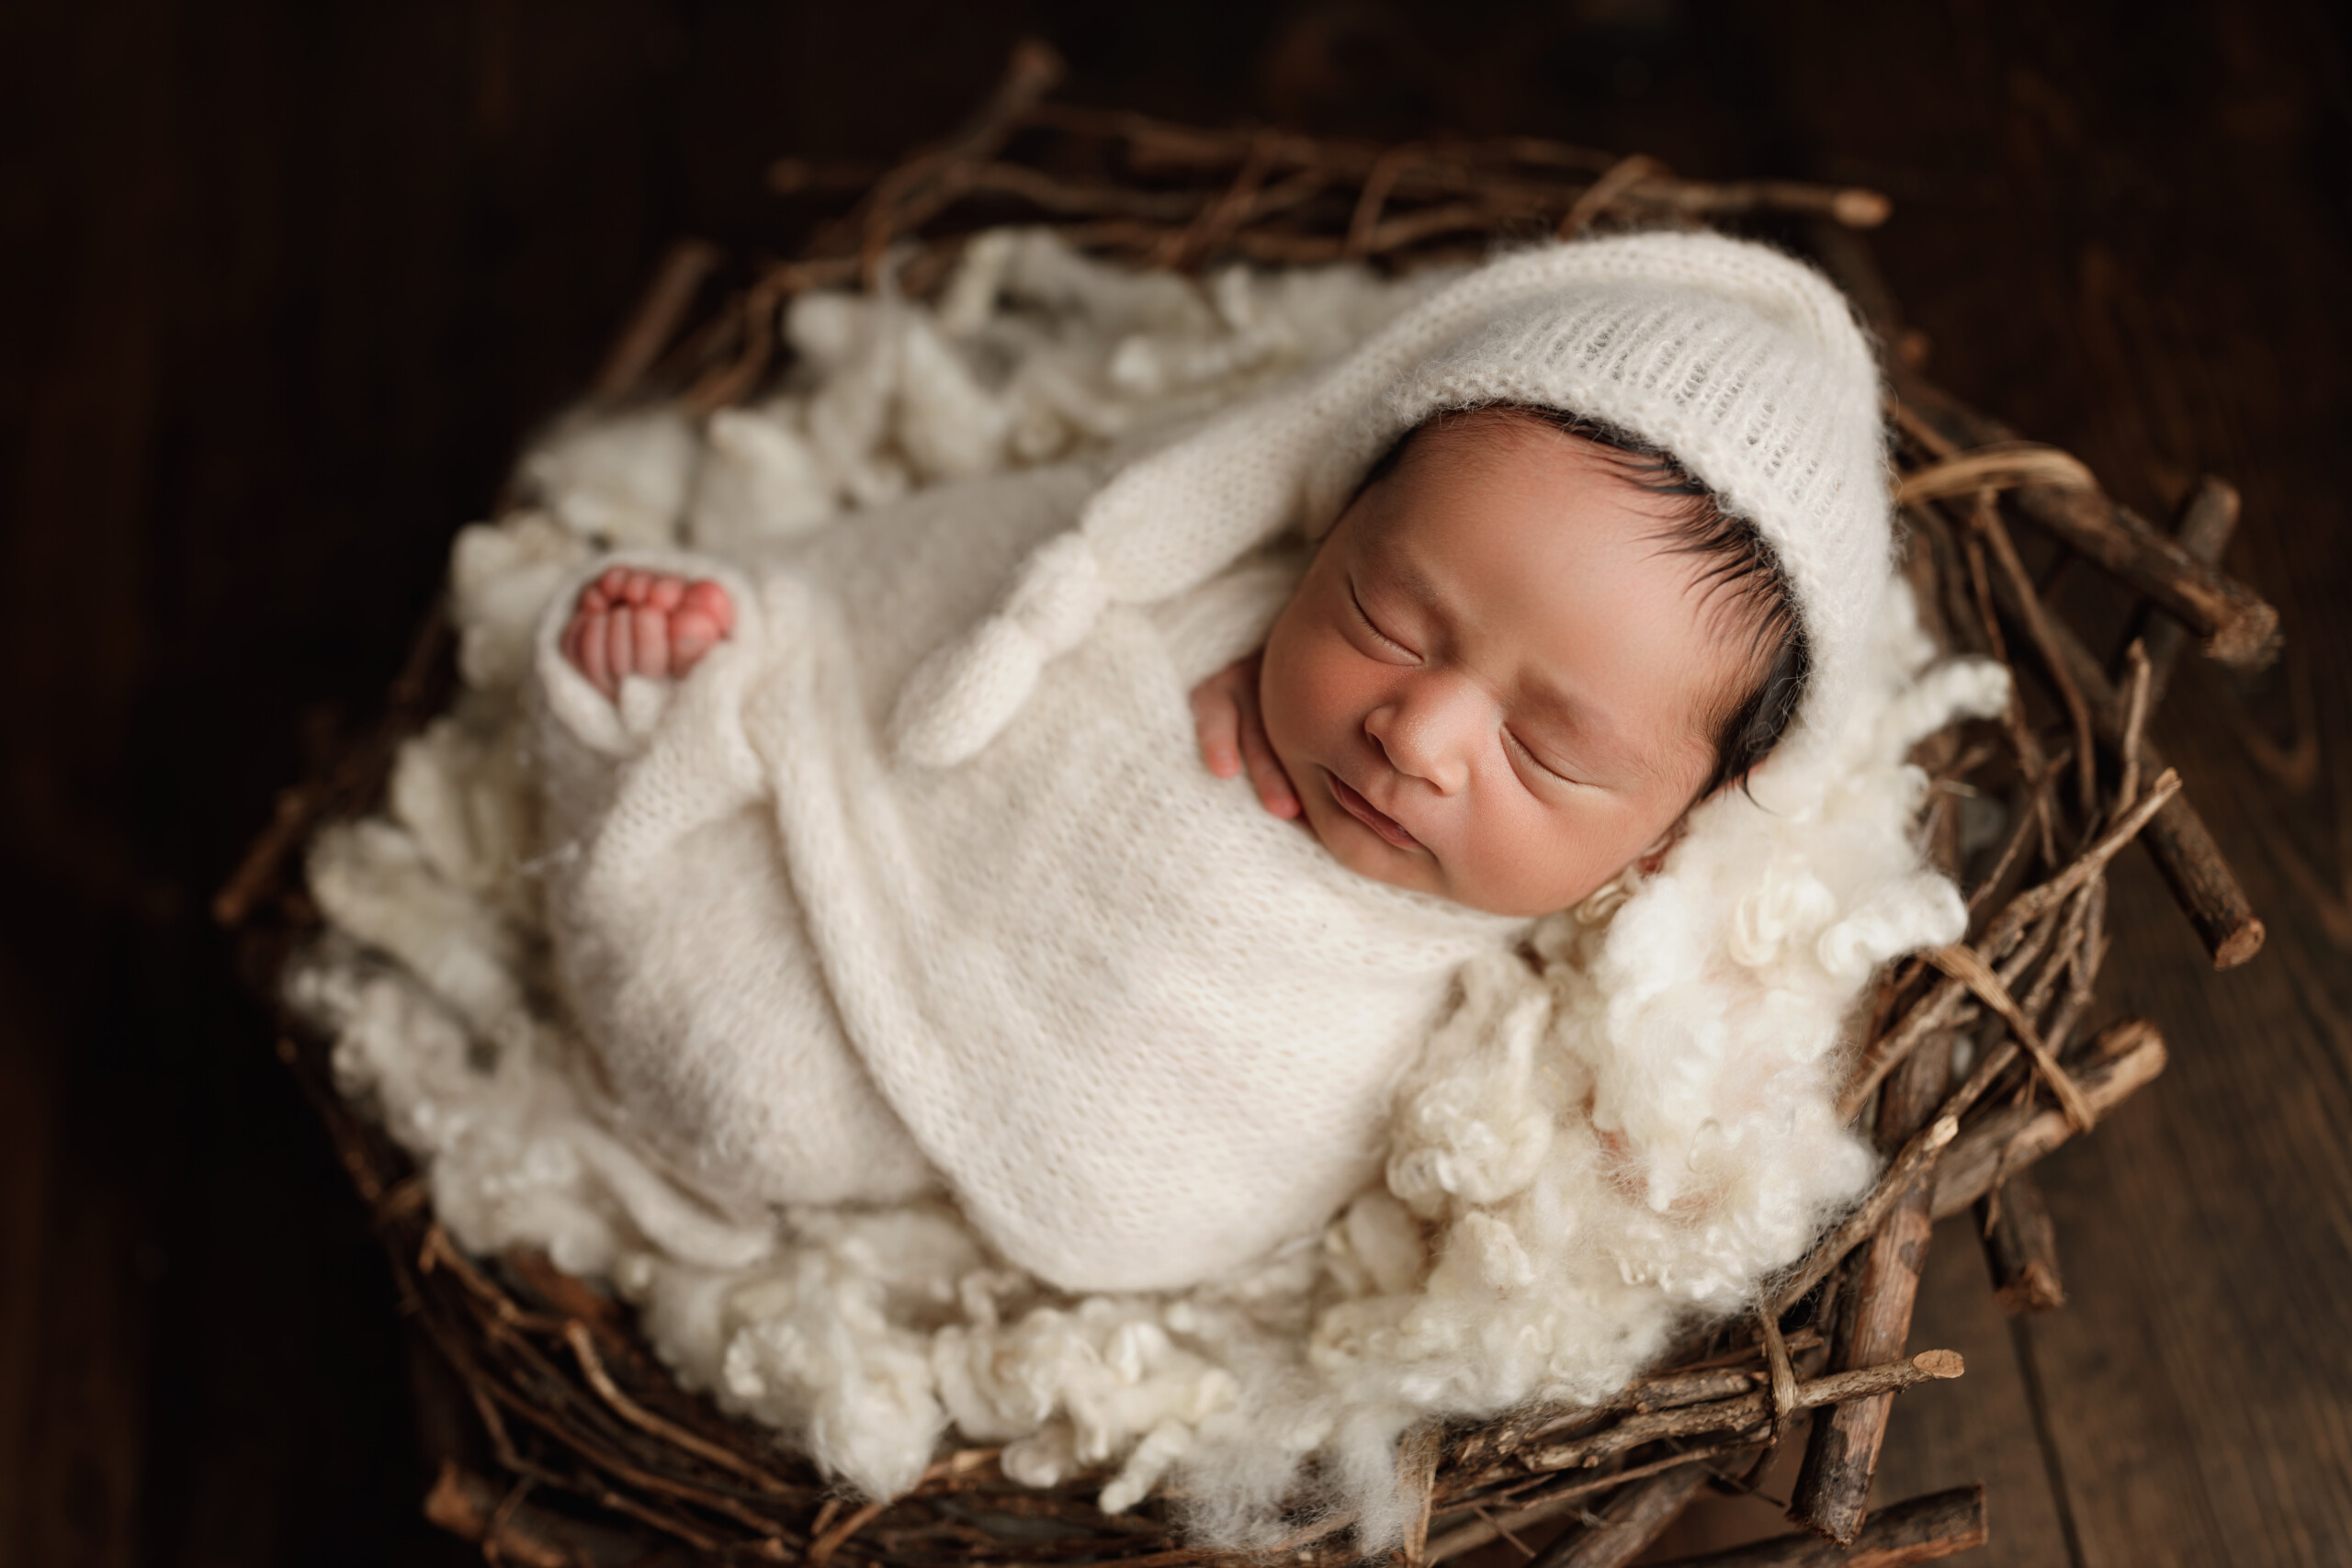 Caleb’s Newborn Session from Evie Lynn Photography